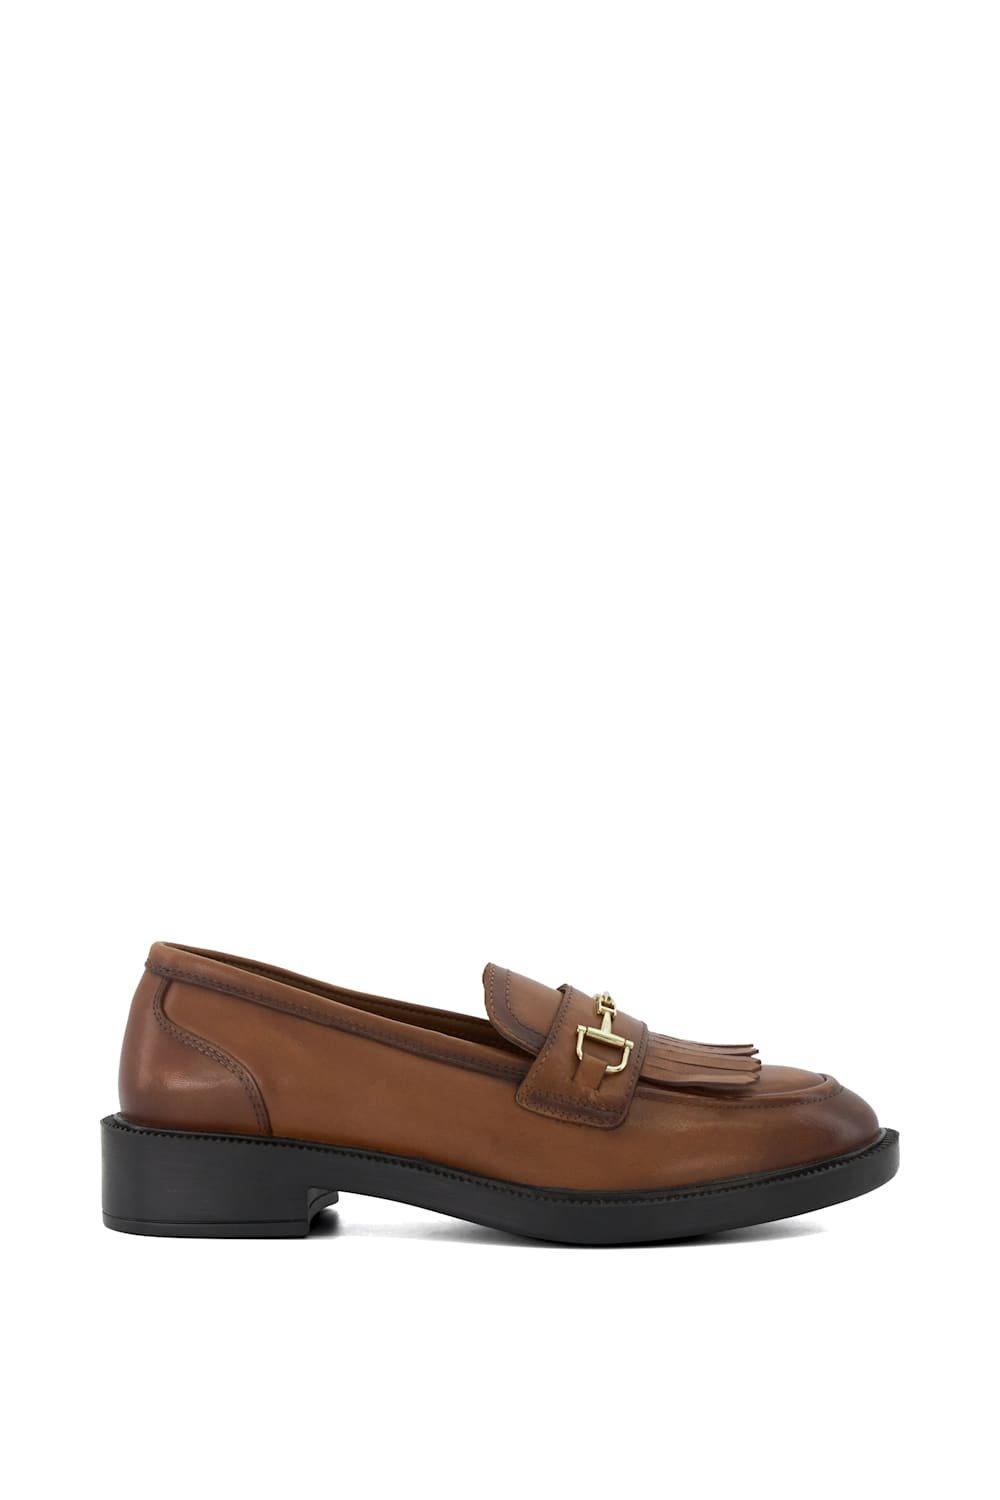 Flats | 'Guided' Leather Loafers | Dune London